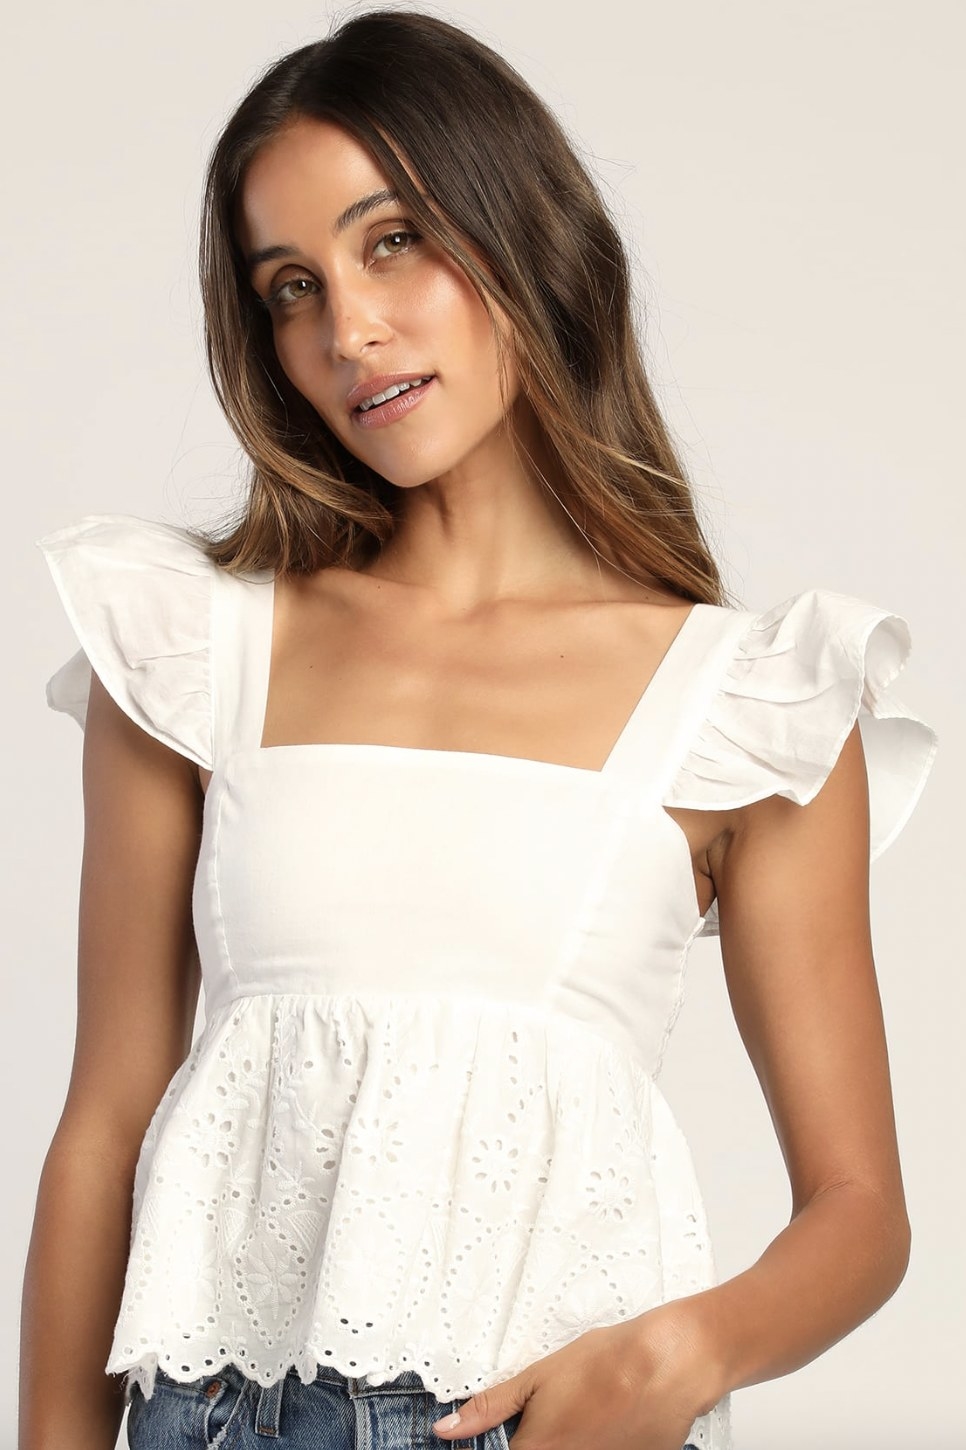 A model wearing a white peasant top